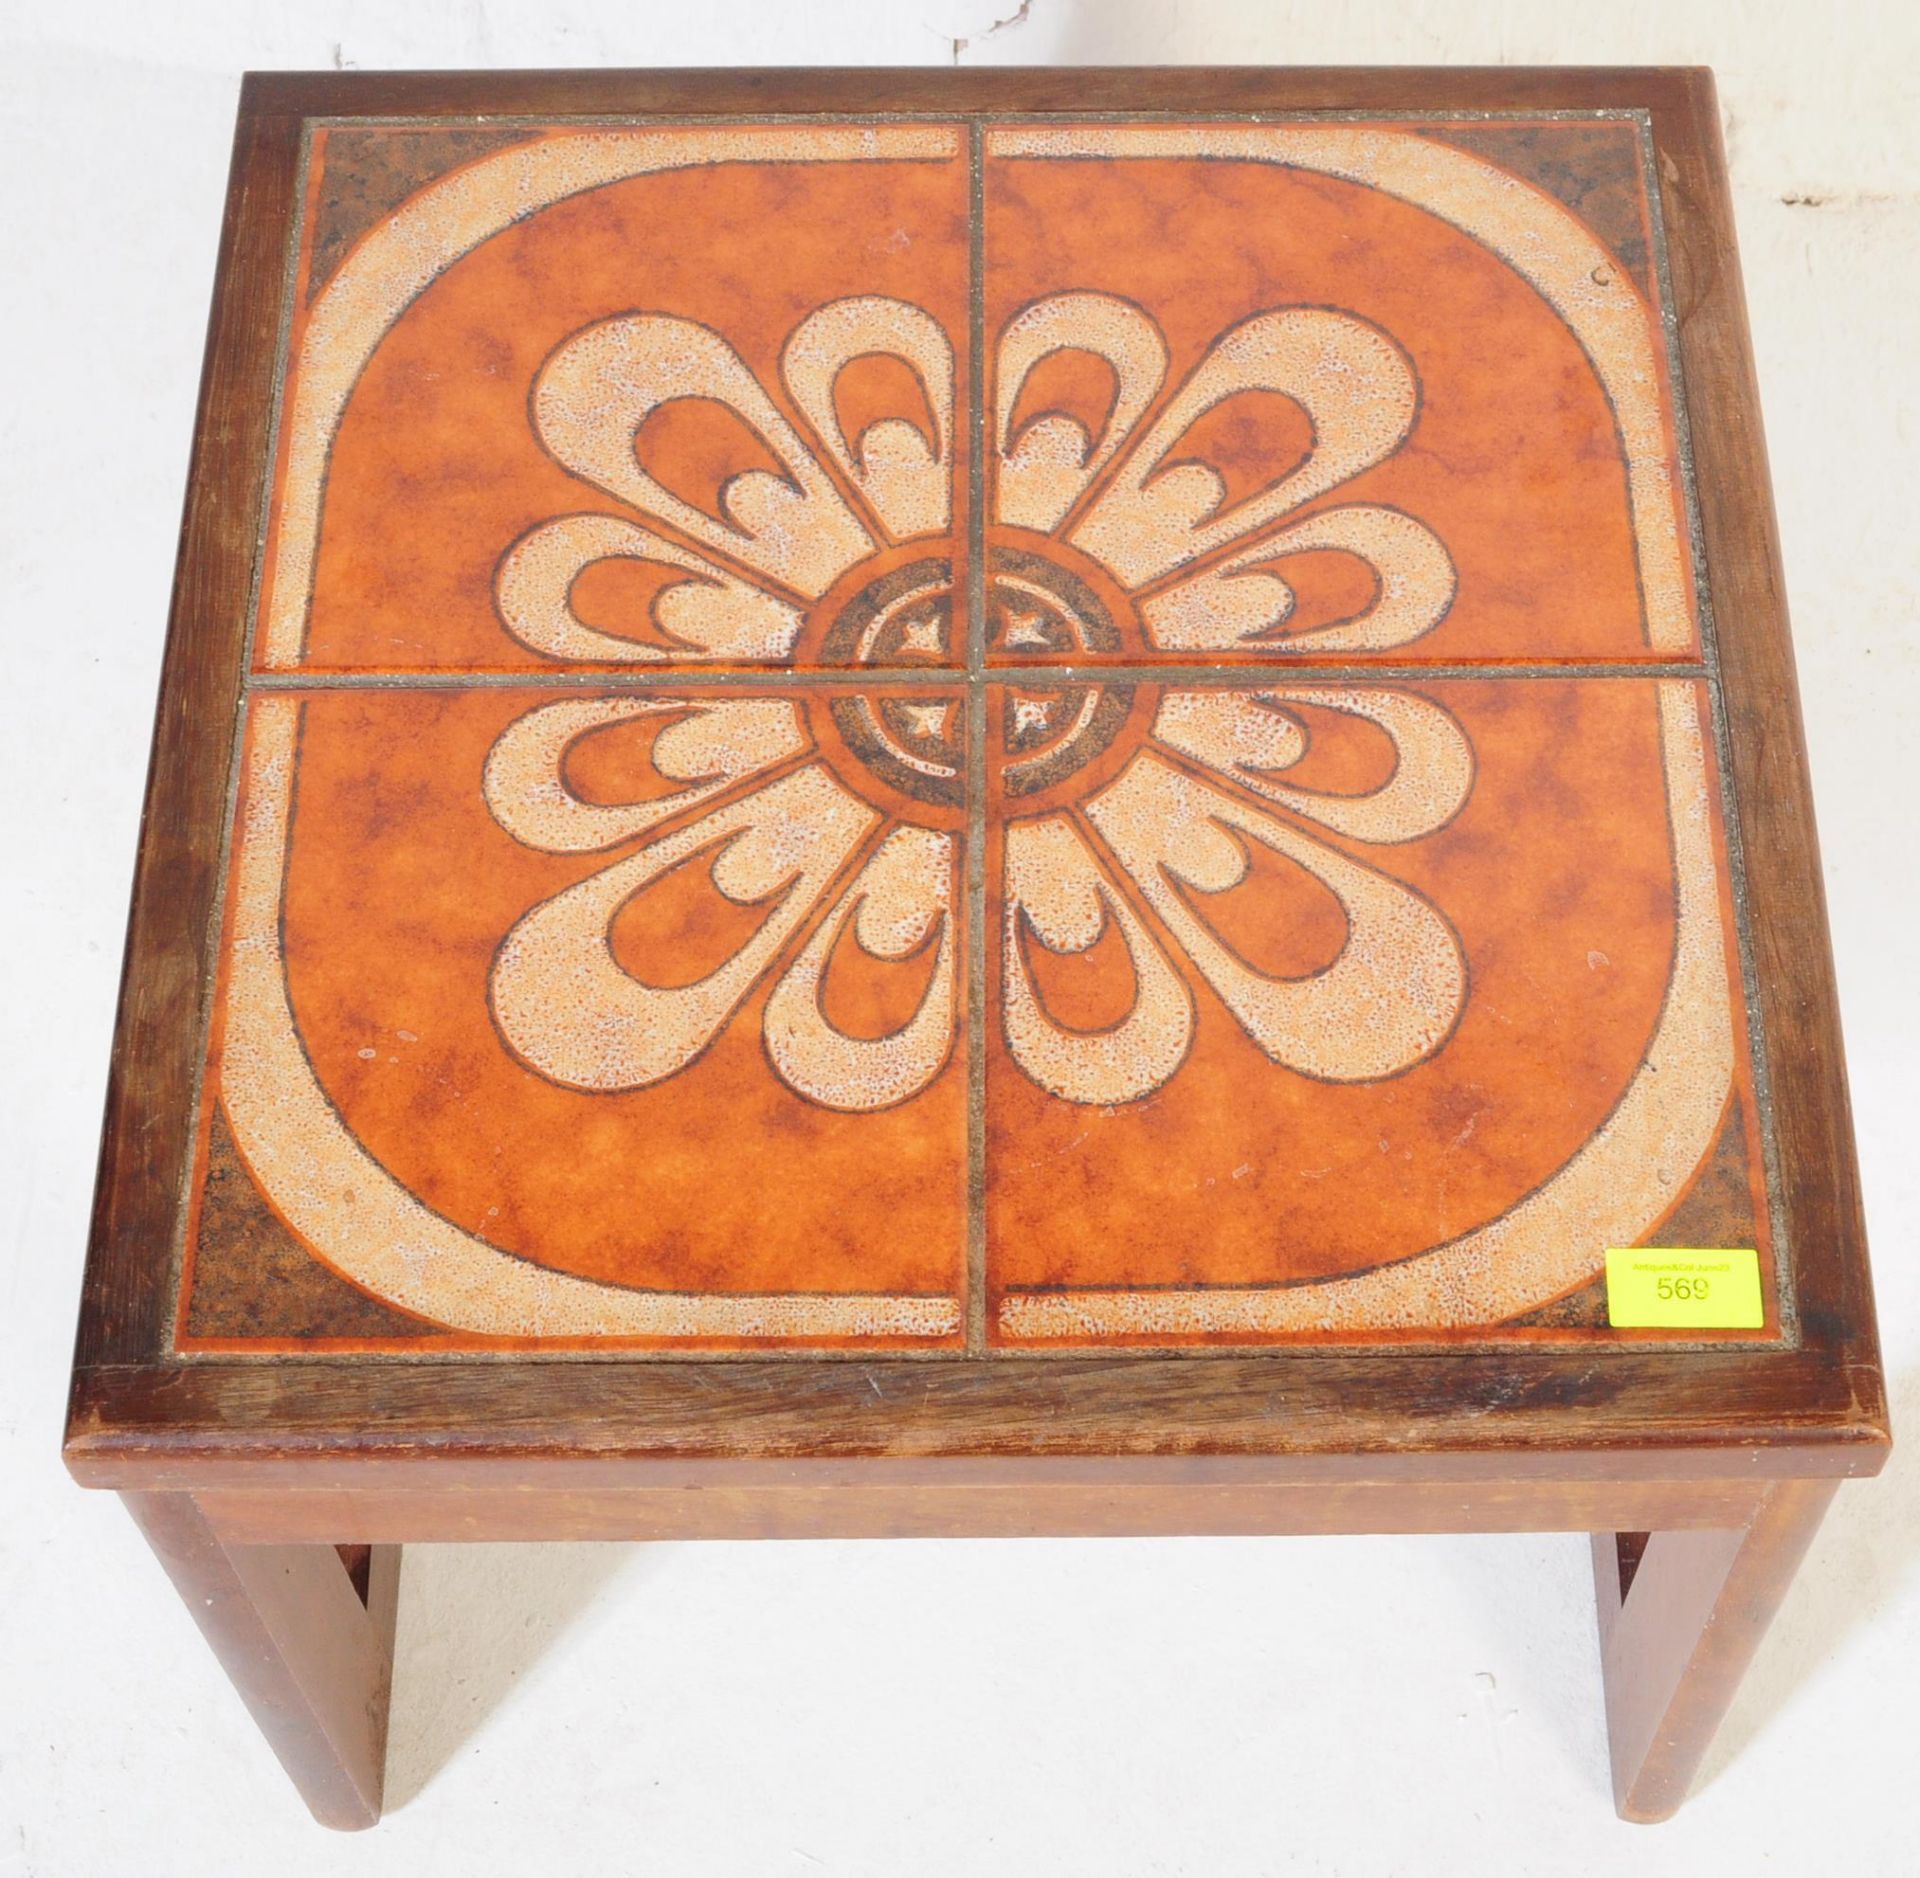 RETRO MID CENTURY 1970S TILE TOP SIDE TABLE - Image 4 of 4